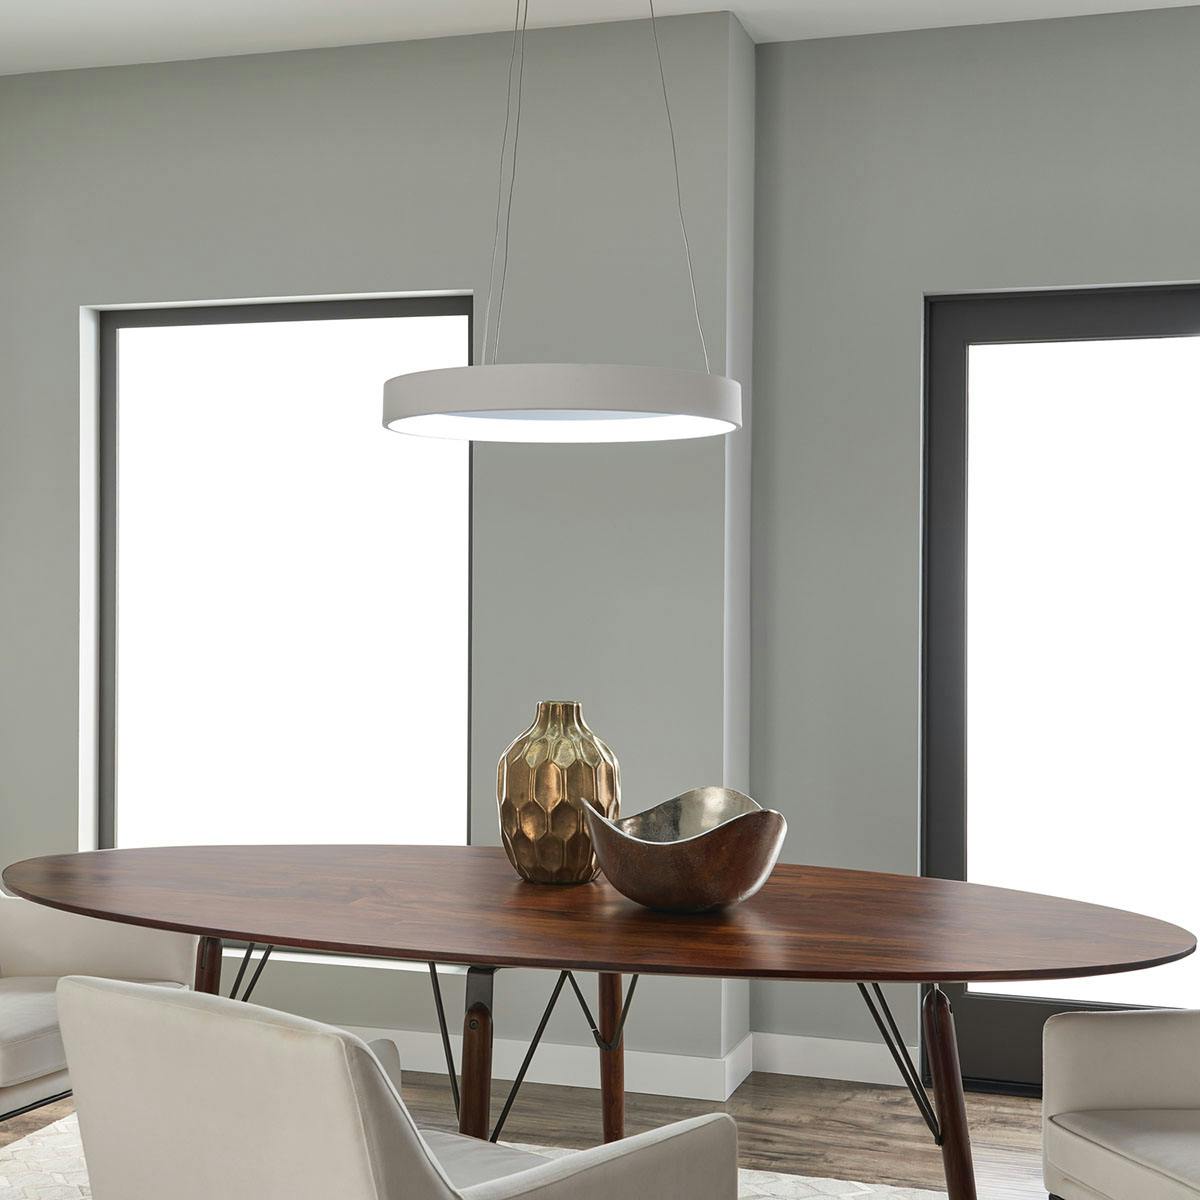 Day time dining room image featuring Fornello pendant 83454